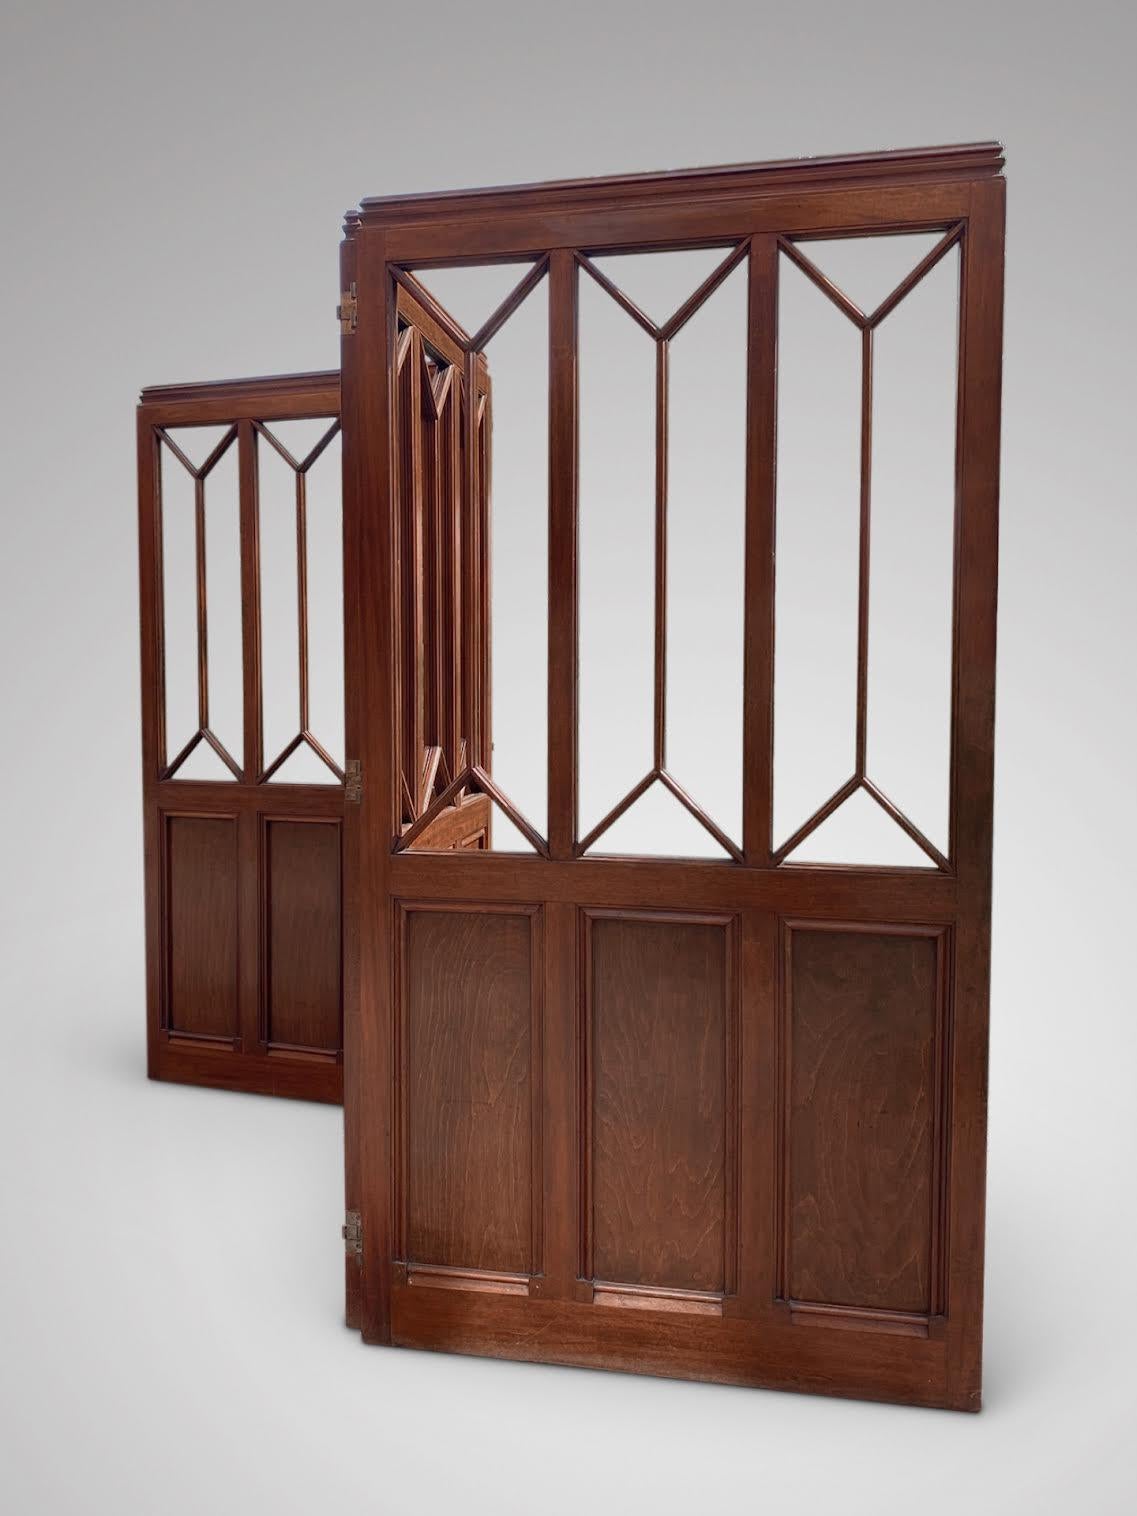 Victorian 19th Century Stunning Quality Three Panel Folding Screen in Solid Mahogany For Sale